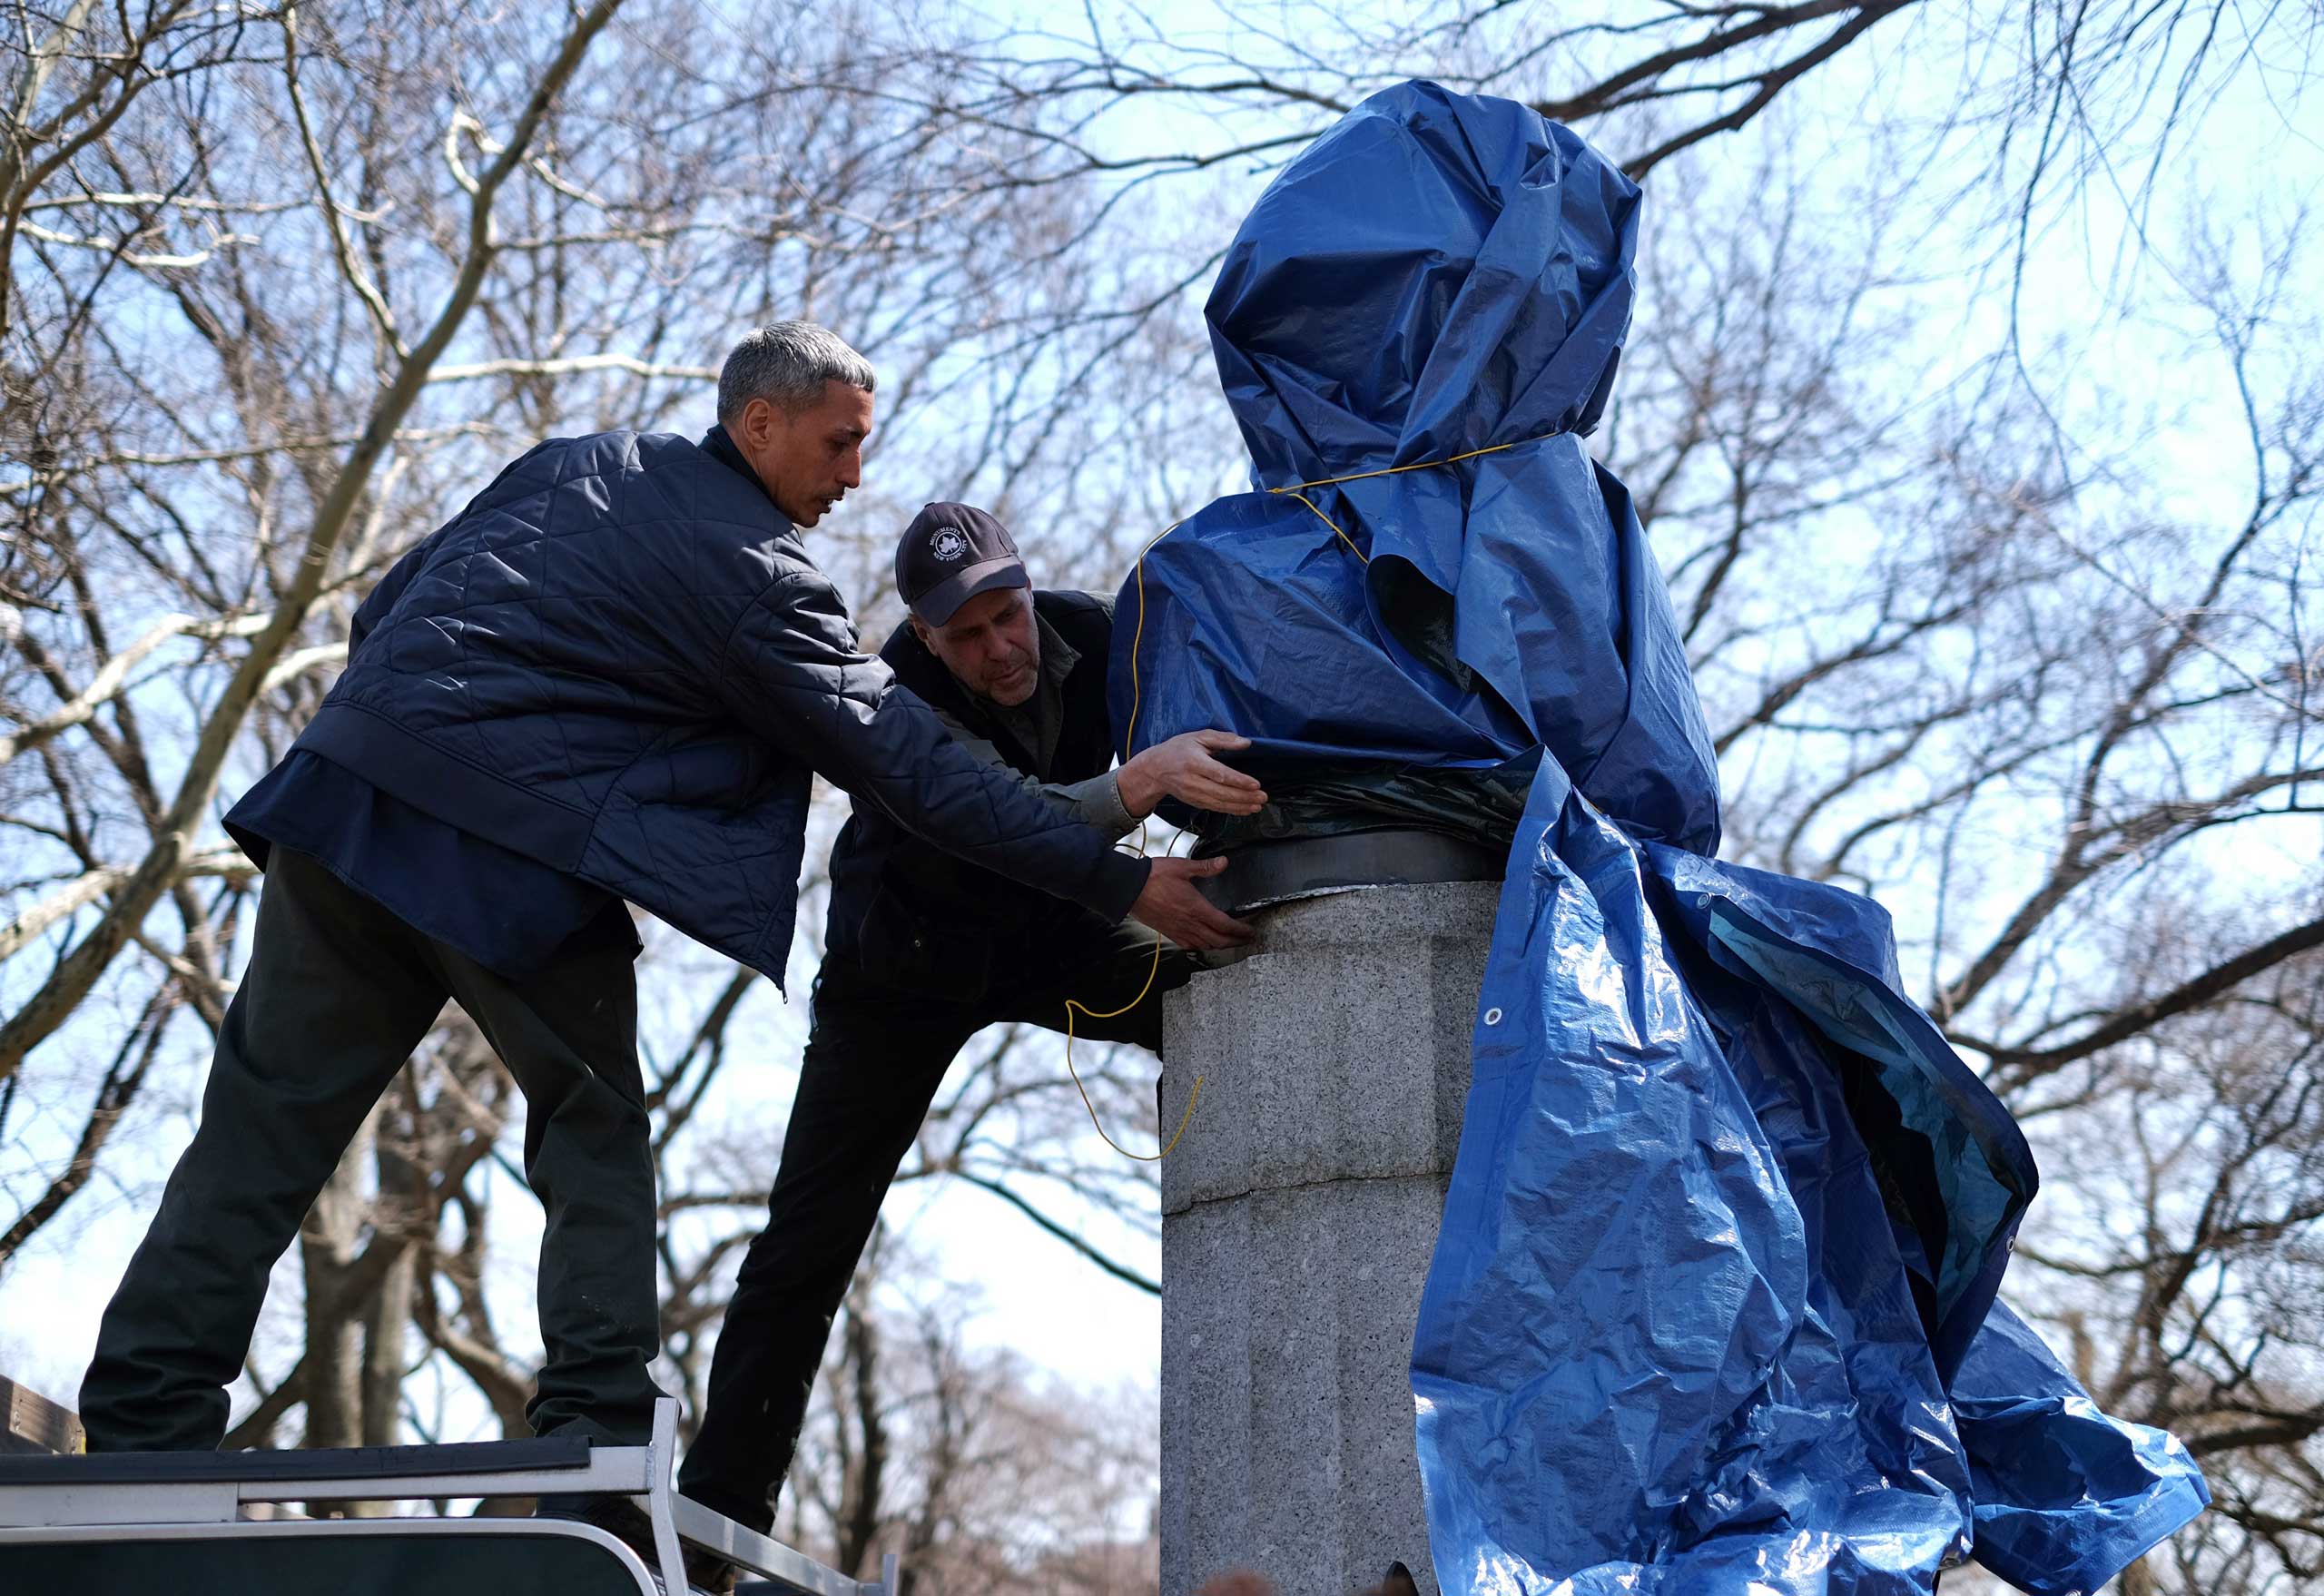 New York City Department of Parks and Recreation employees take down a statue of former National Security Agency (NSA) contractor Edward Snowden at the Fort Greene Park in Brooklyn, N.Y., on Apr. 6, 2015. (Jewel Samad—AFP/Getty Images)